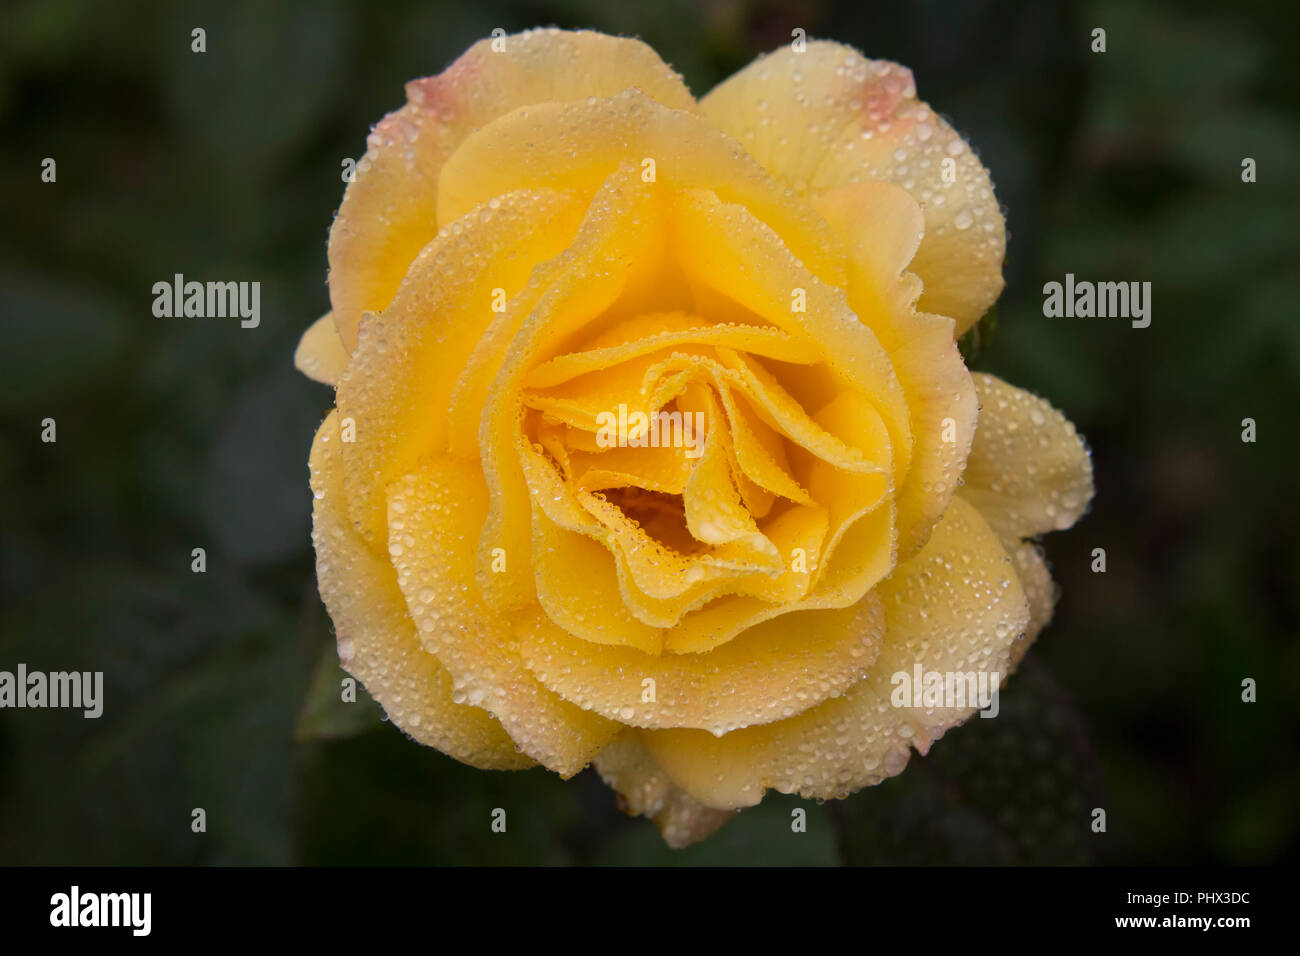 Close up image of a dew coverd yellow rose flower. Stock Photo